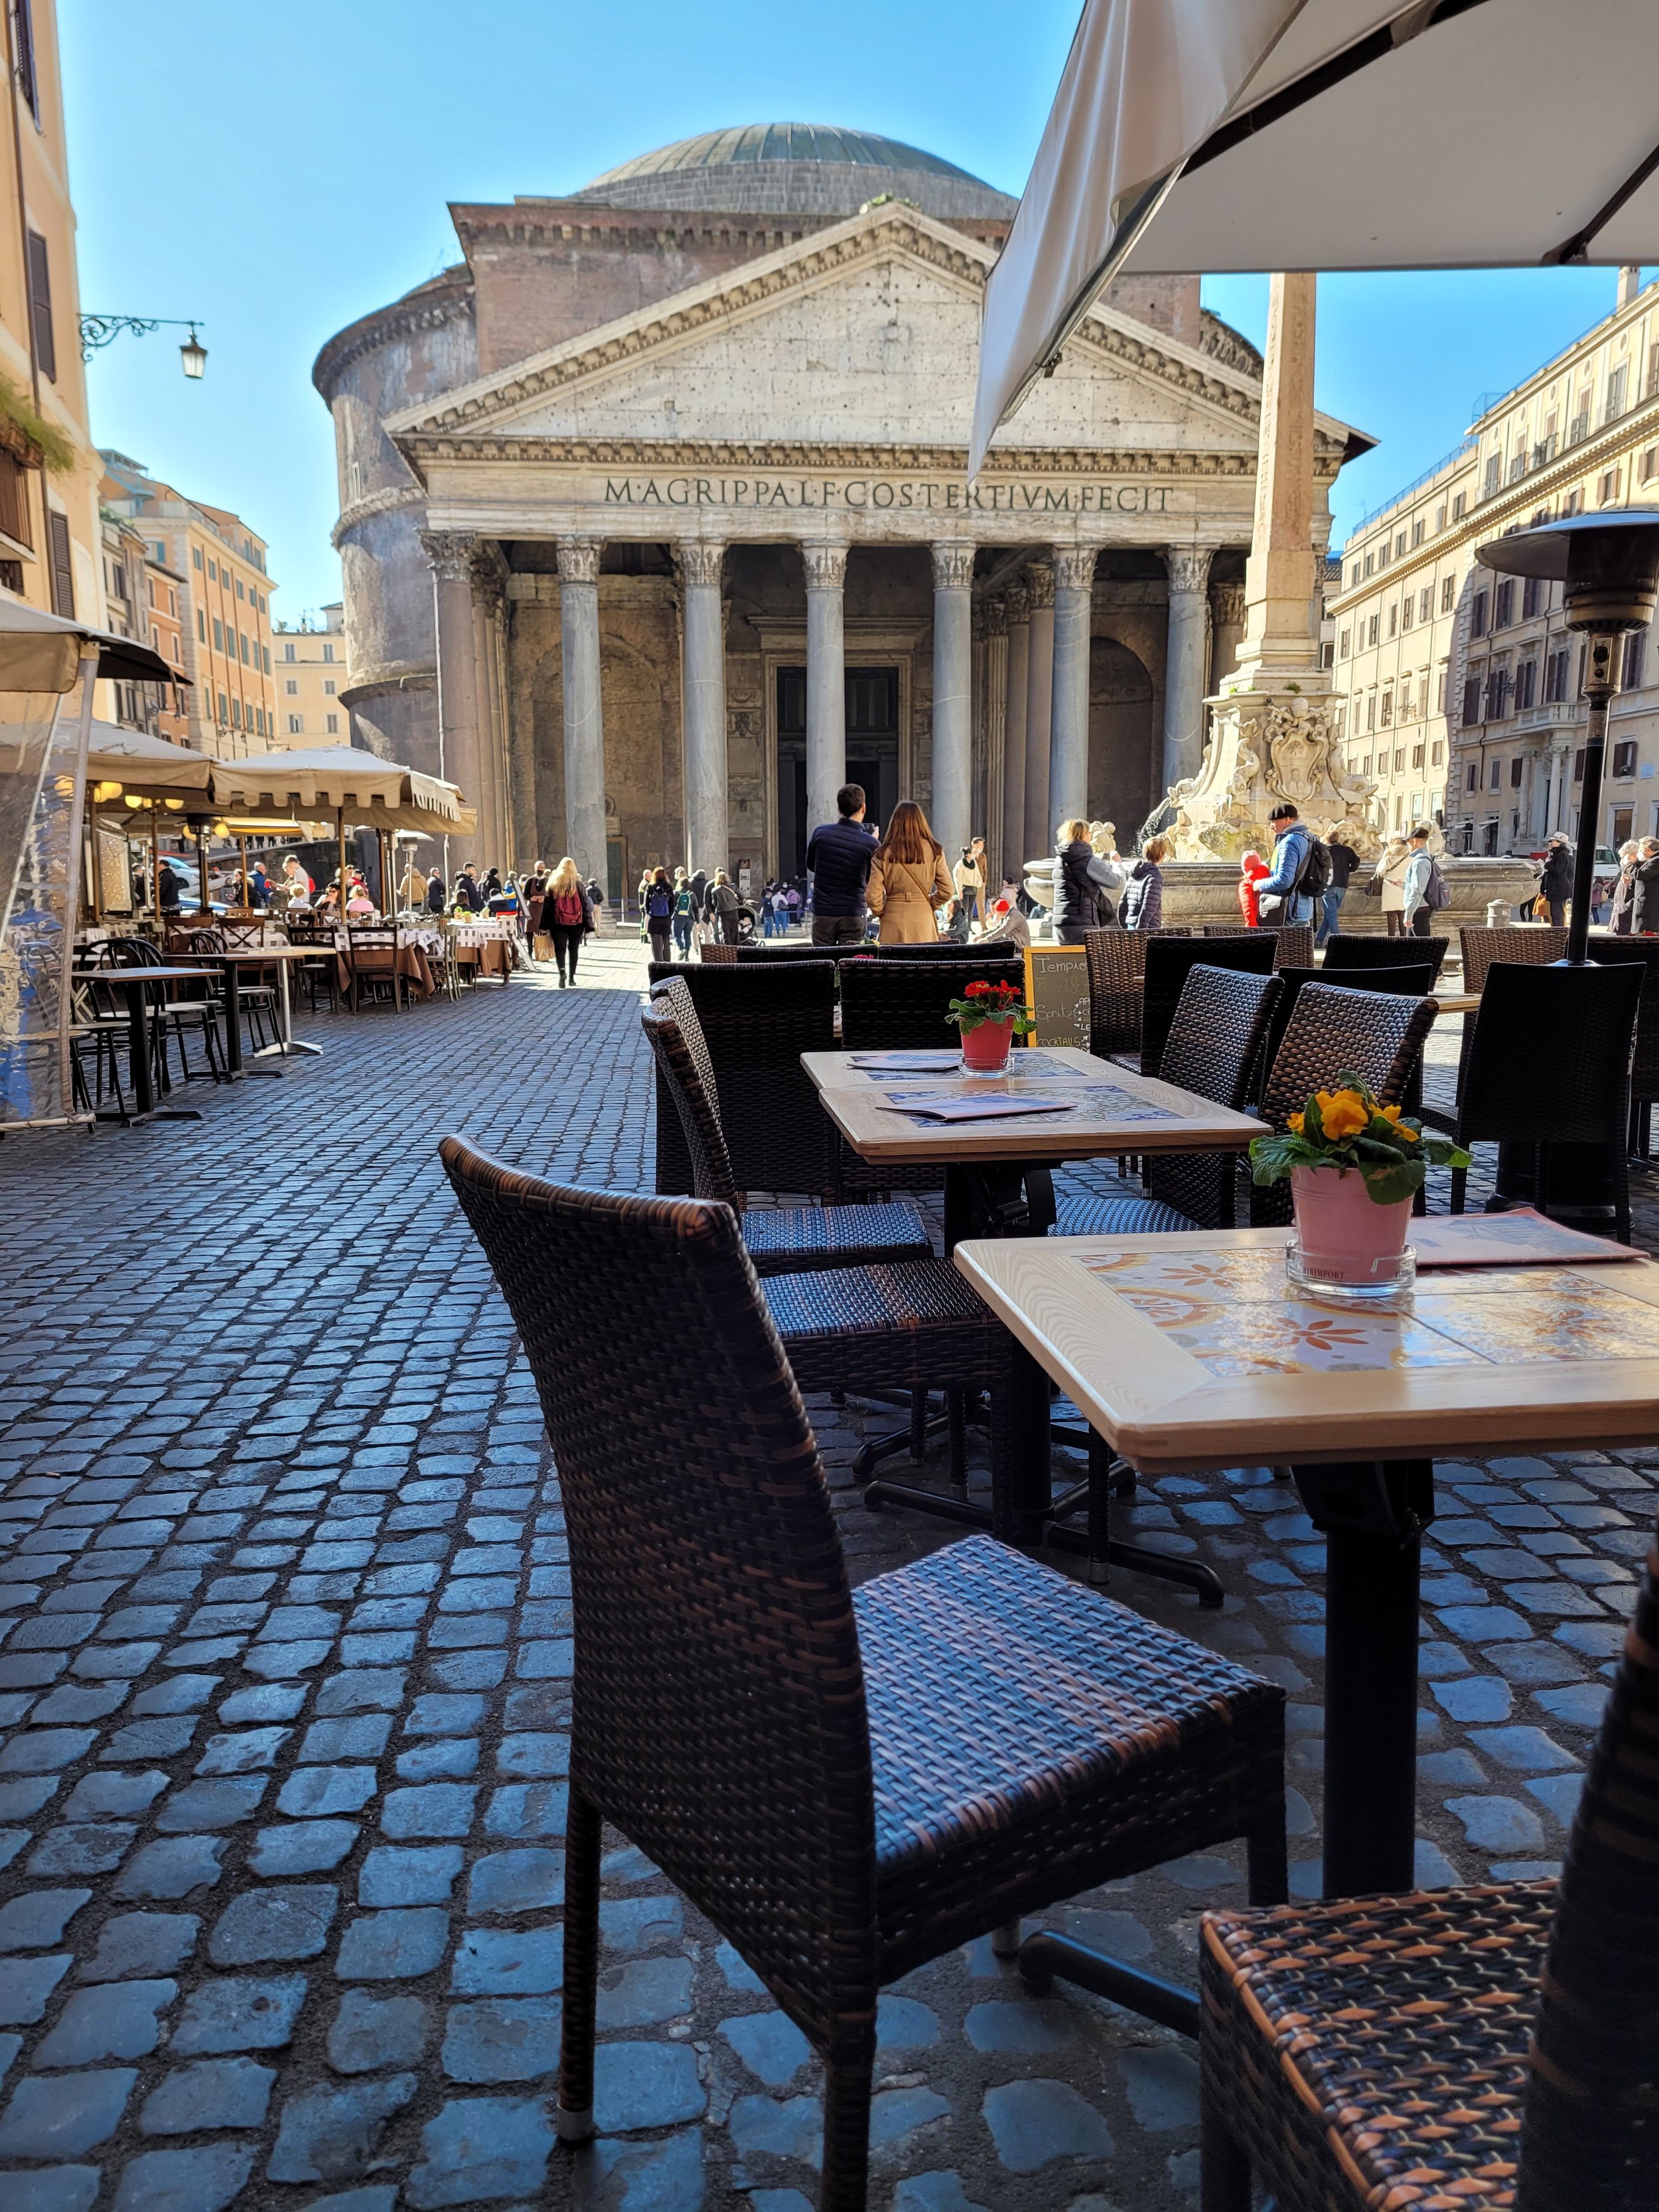 inside the pantheon - The Piazza